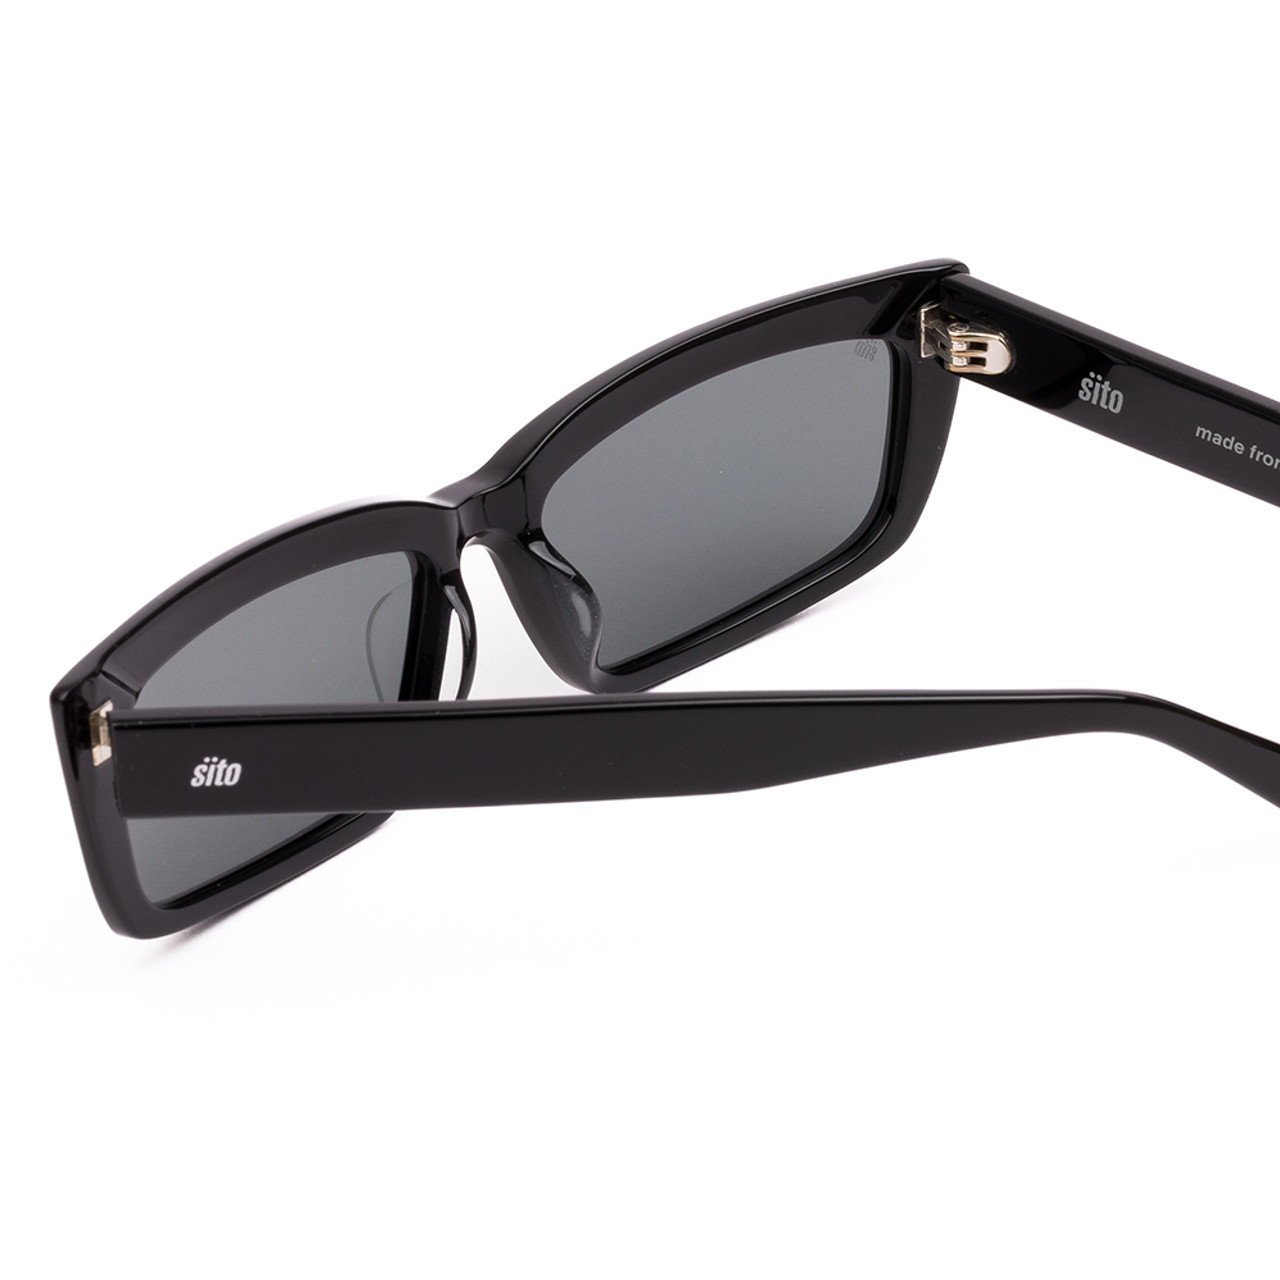 Close Up View of SITO SHADES NIGHT IN MOTION Unisex Square Designer Sunglass Black/Iron Gray 57mm